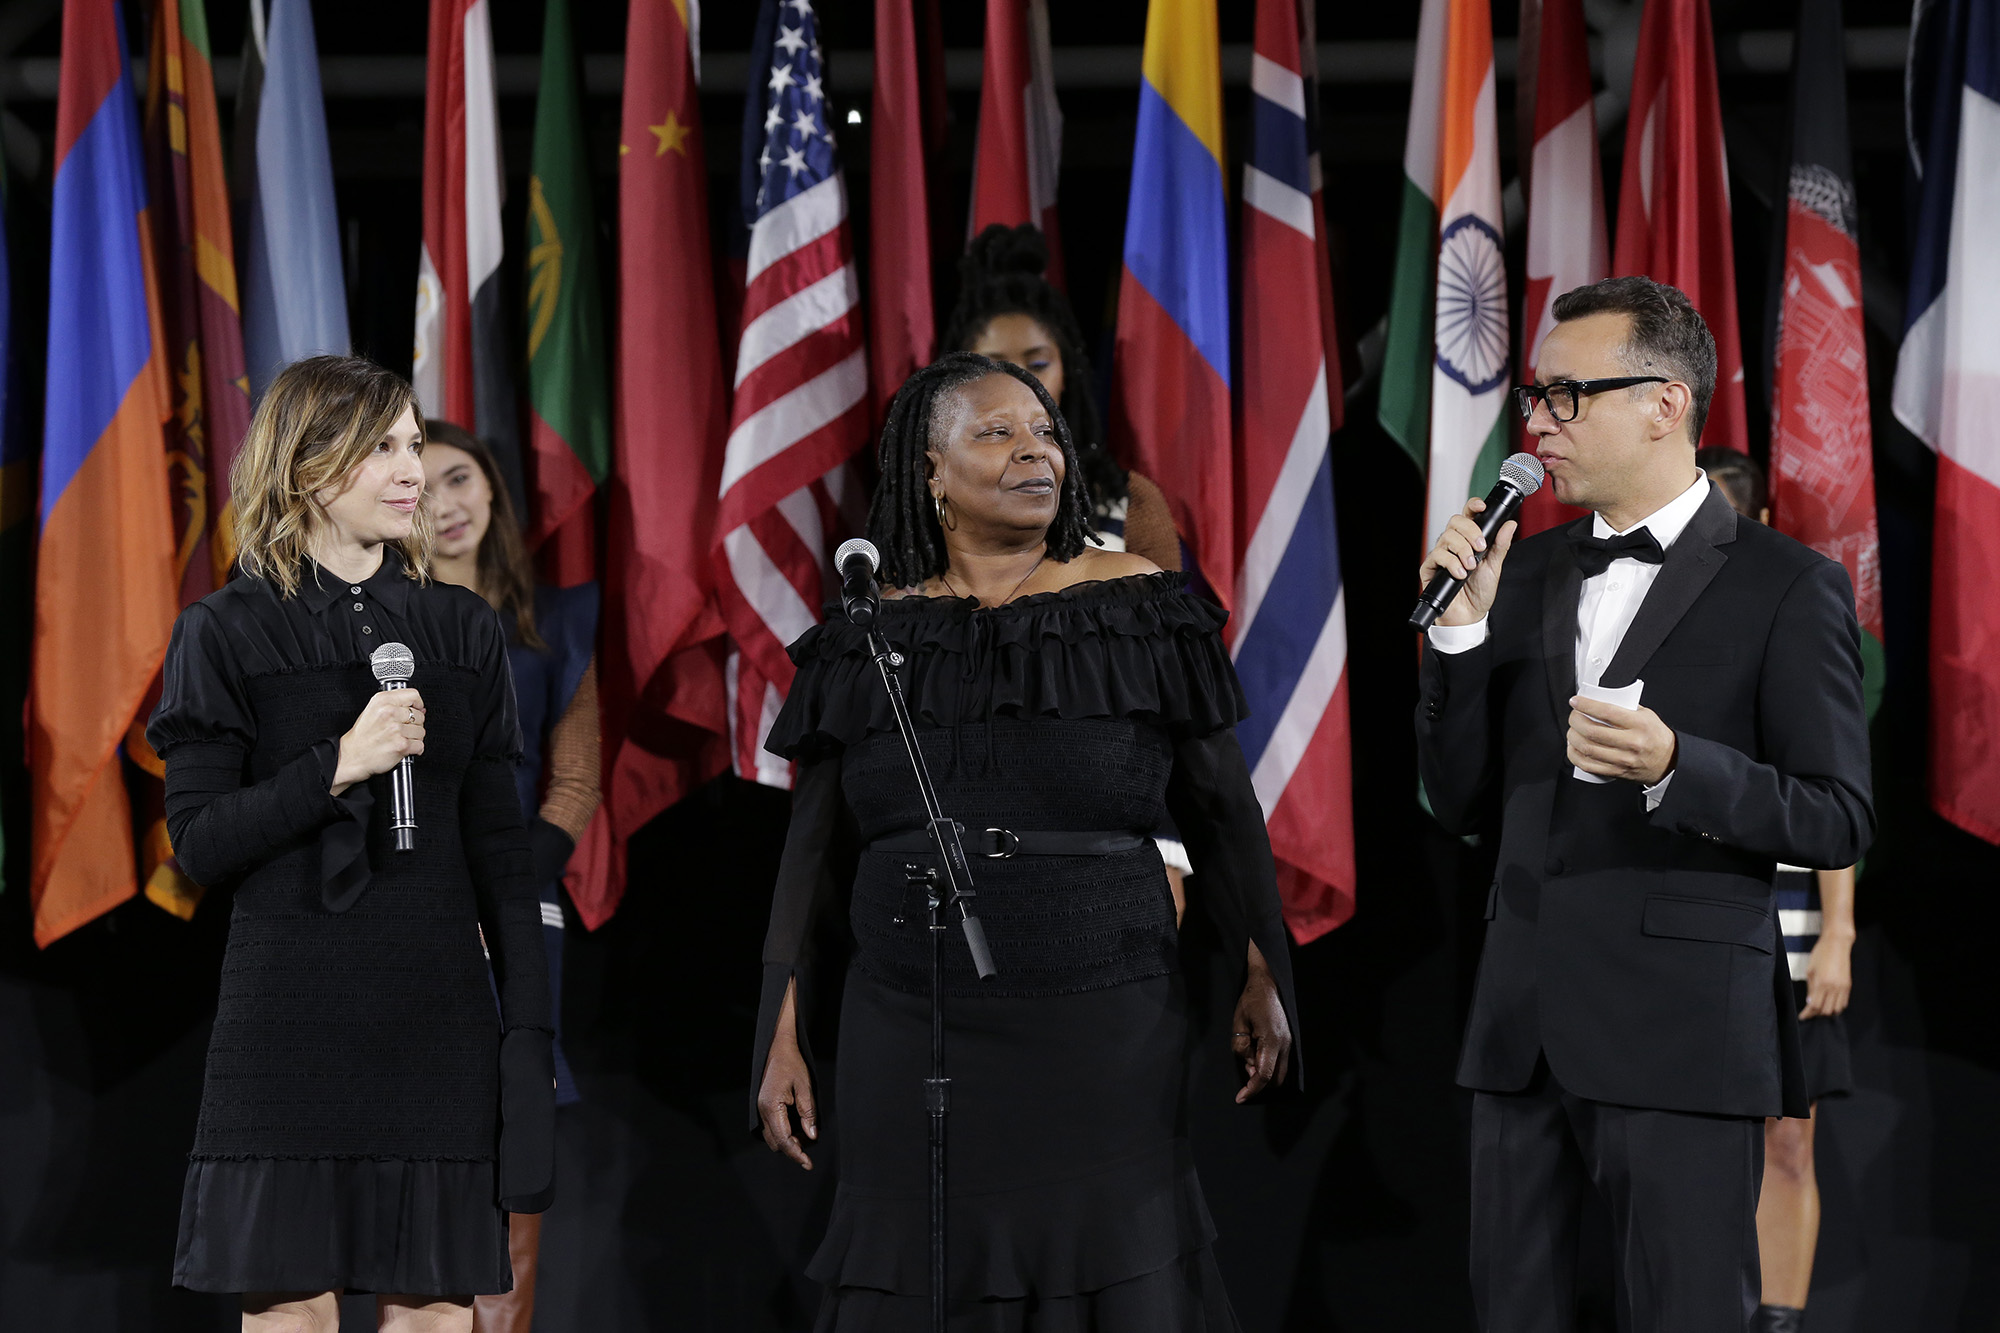 Carrie Brownstein, Whoopi Goldberg, and Fred Armisen speak onstage during the Opening Ceremony fashion show during New York Fashion Week at Jacob Javits Center on September 11, 2016 in New York City.  (Photo by JP Yim/Getty Images) (JP Yim—Getty Images)